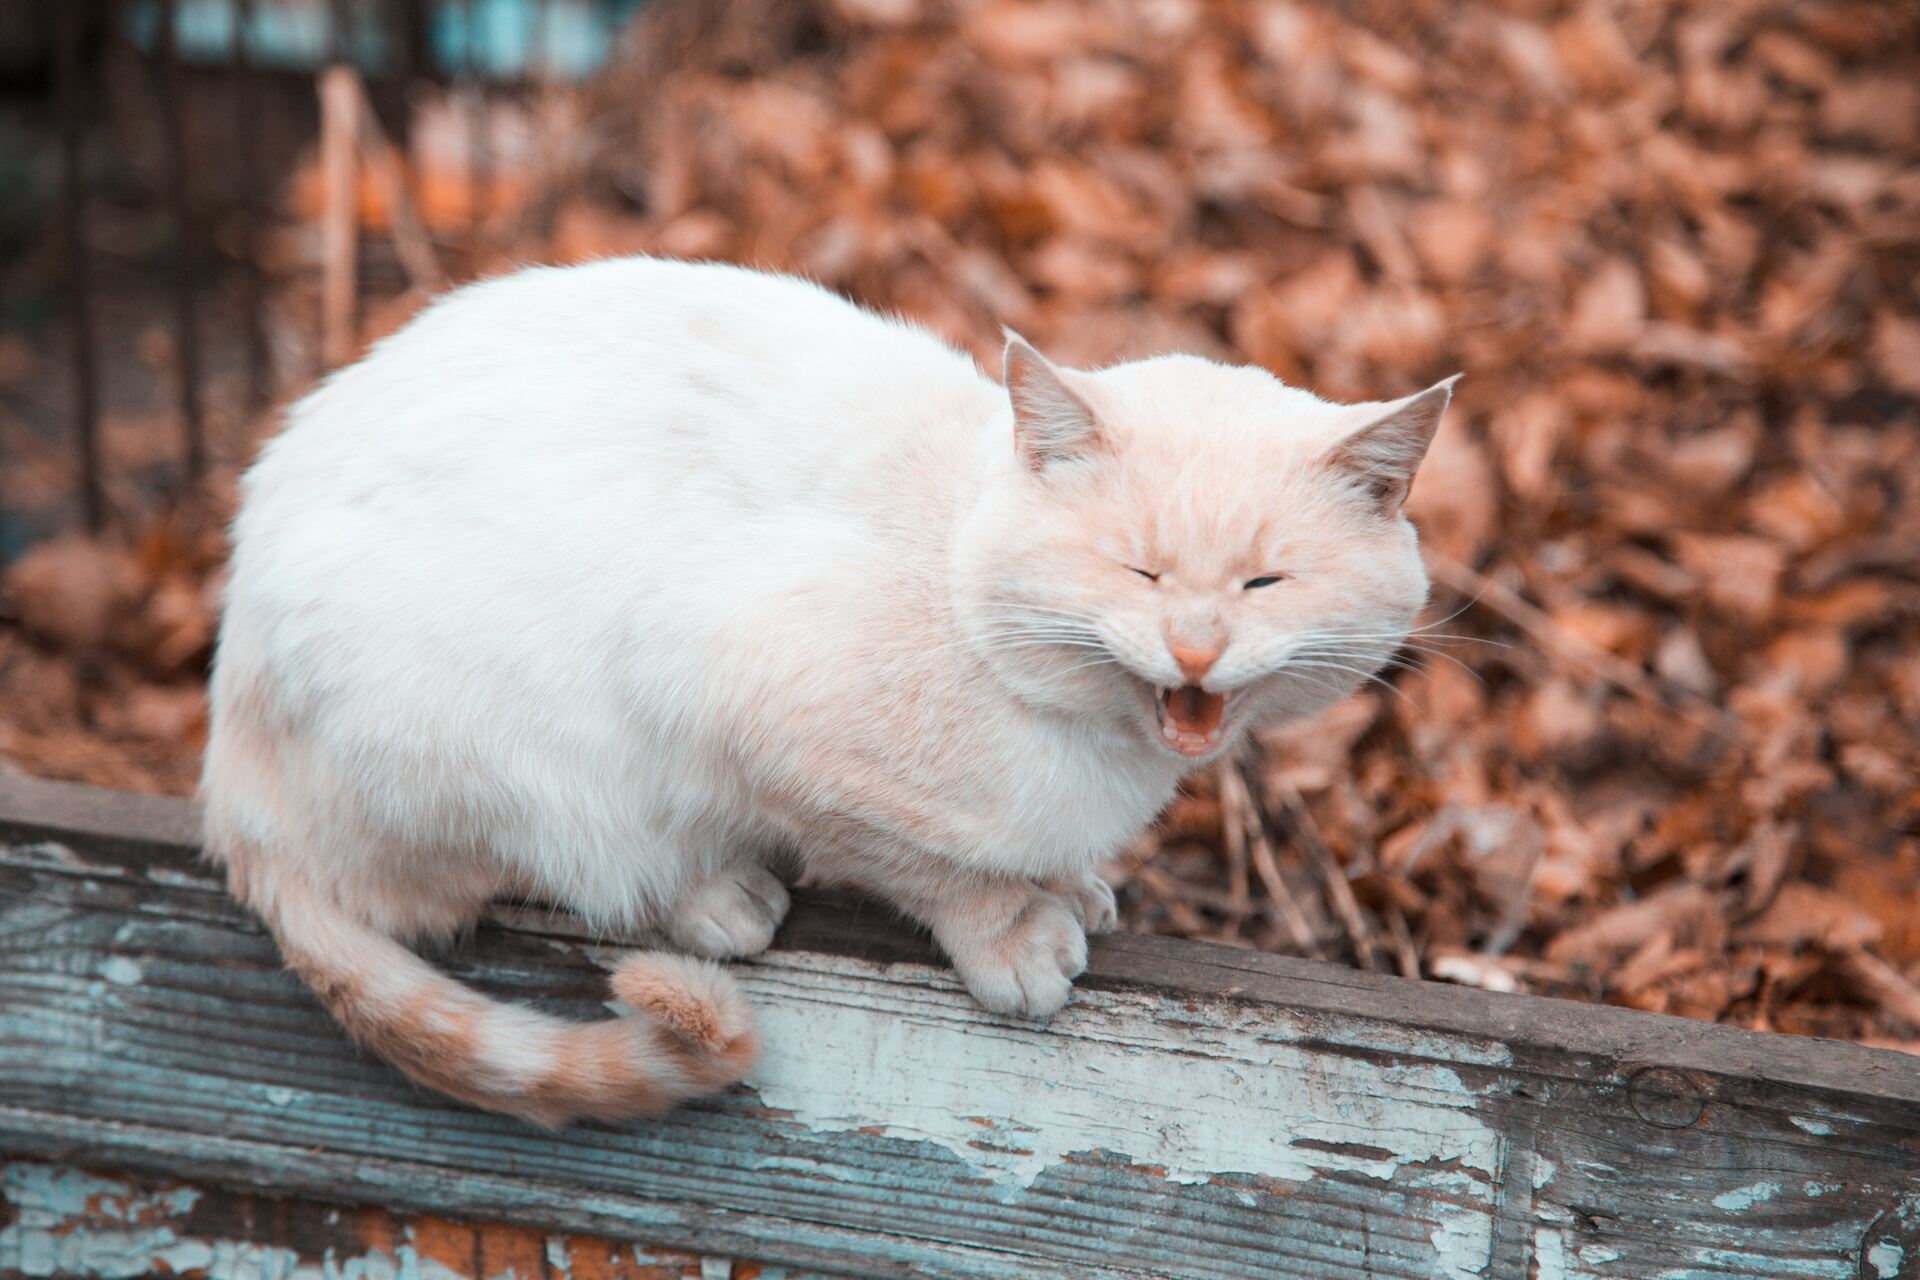 A cat crying while sitting on a wooden fence outdoors